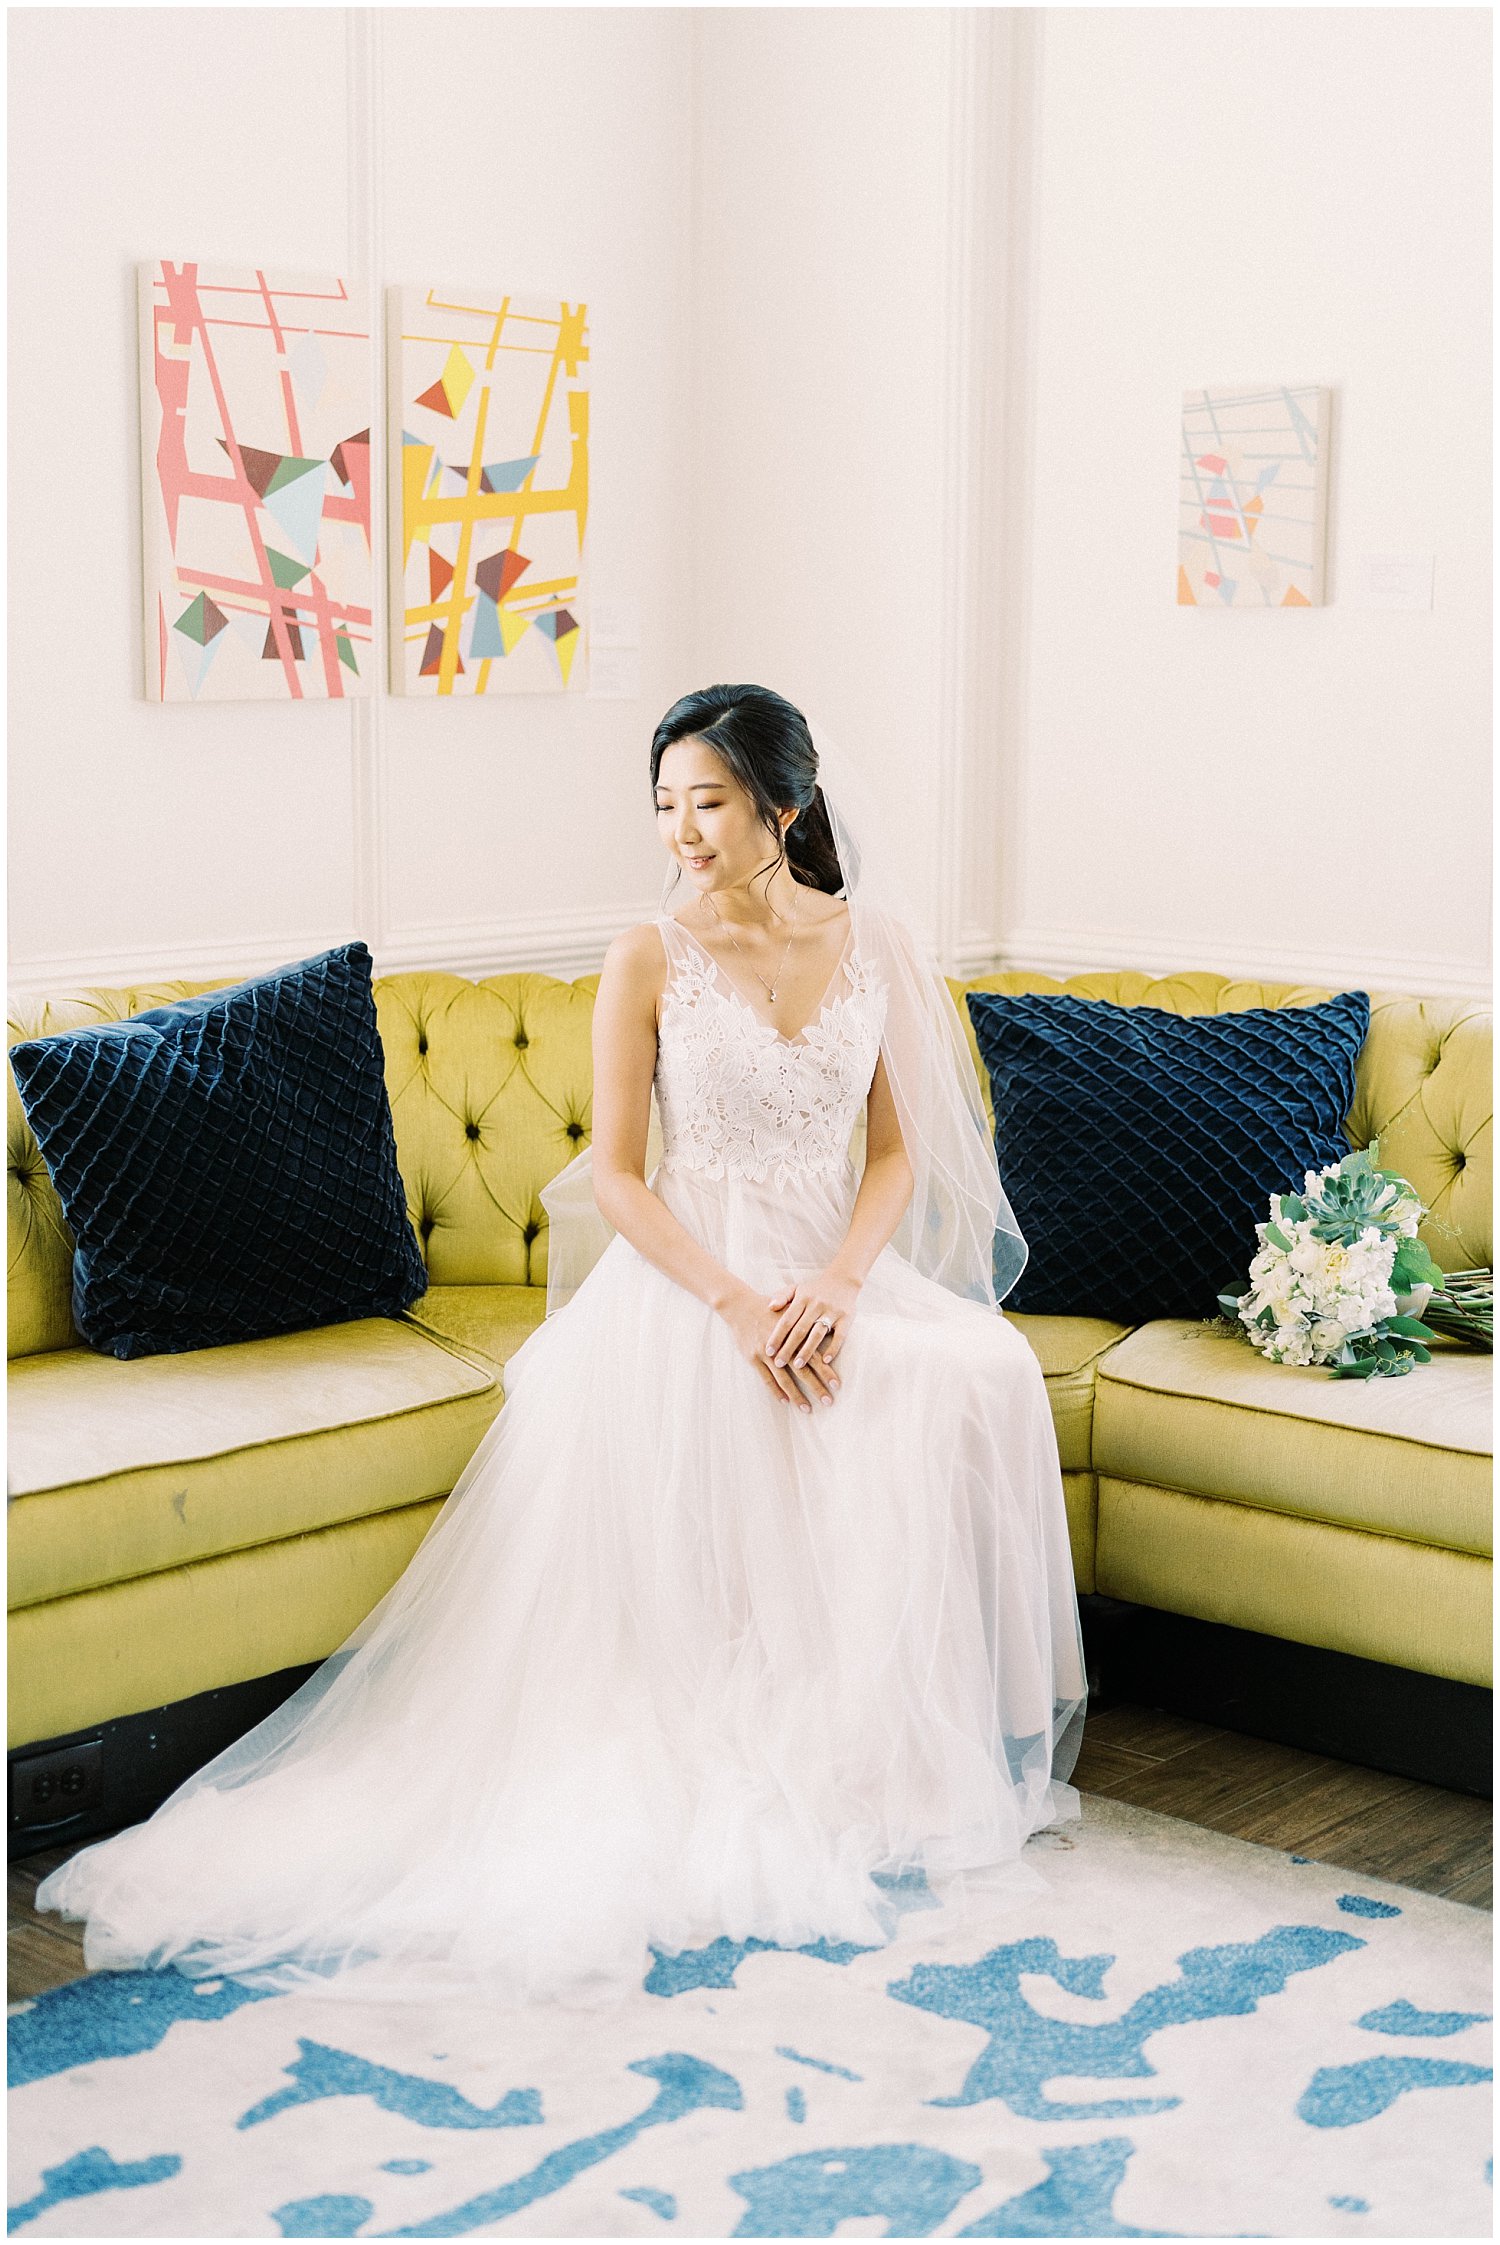 Baltimore Wedding at Winslow Room, Parker Metal Building by Winnie Dora Photography